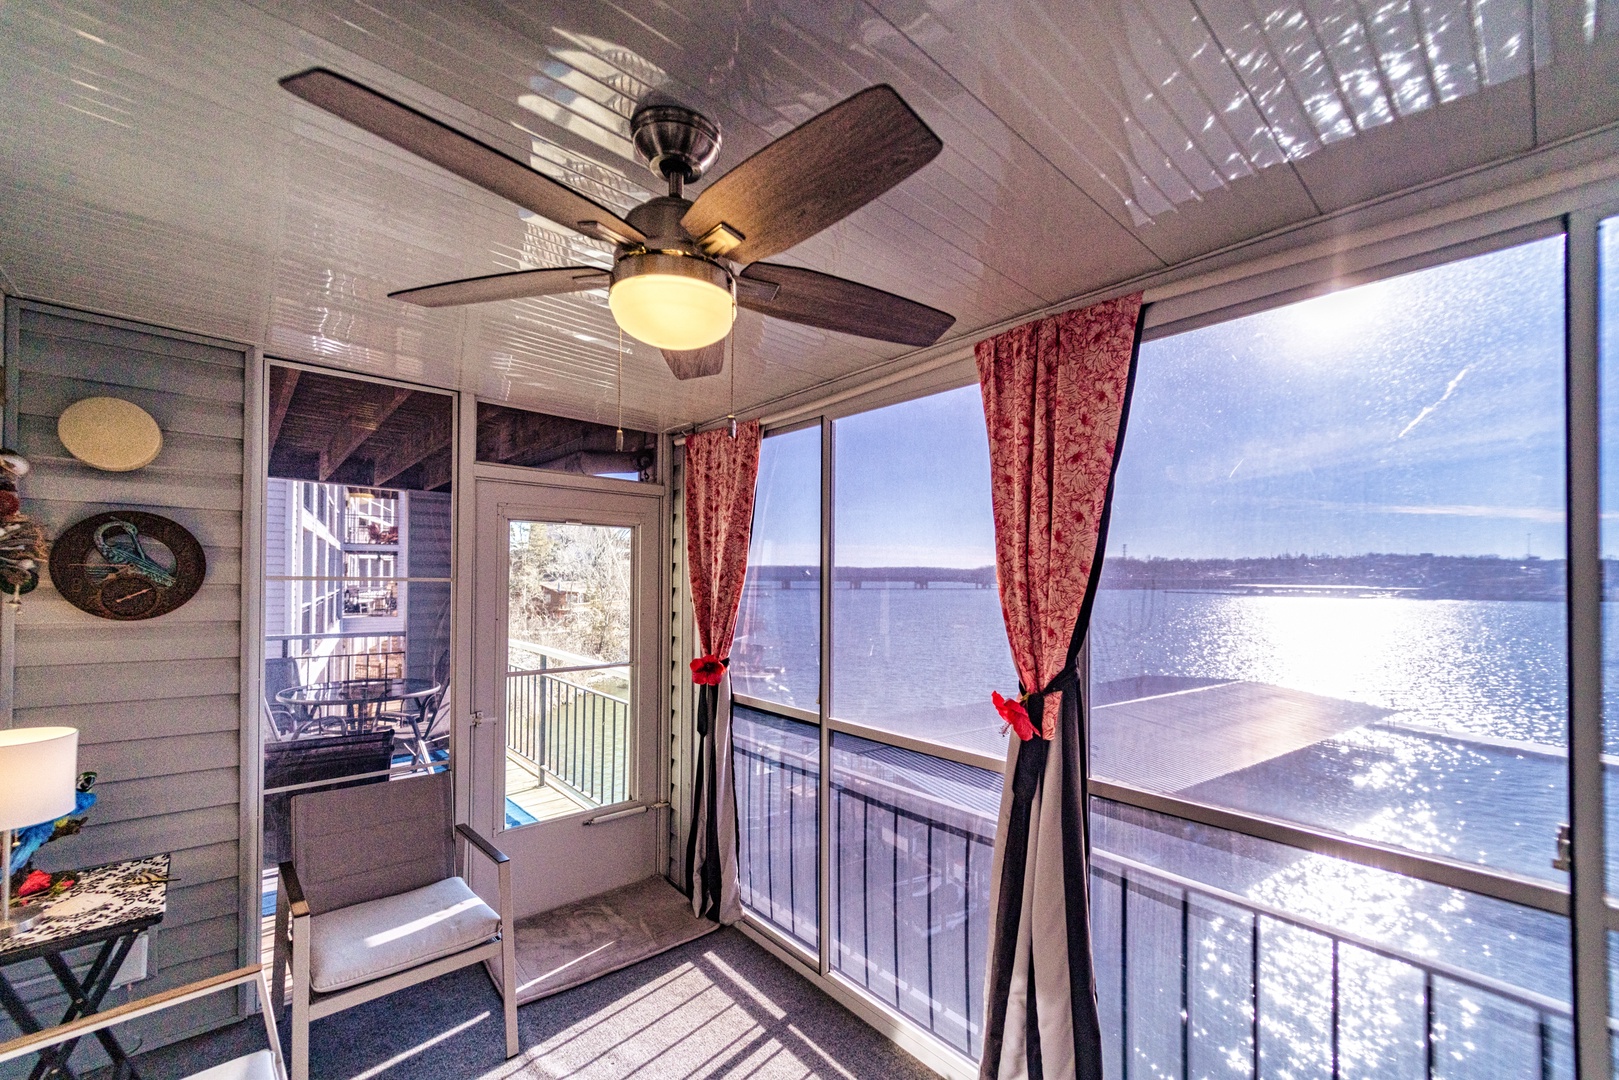 Wake up to magical lake views from the cozy enclosed deck